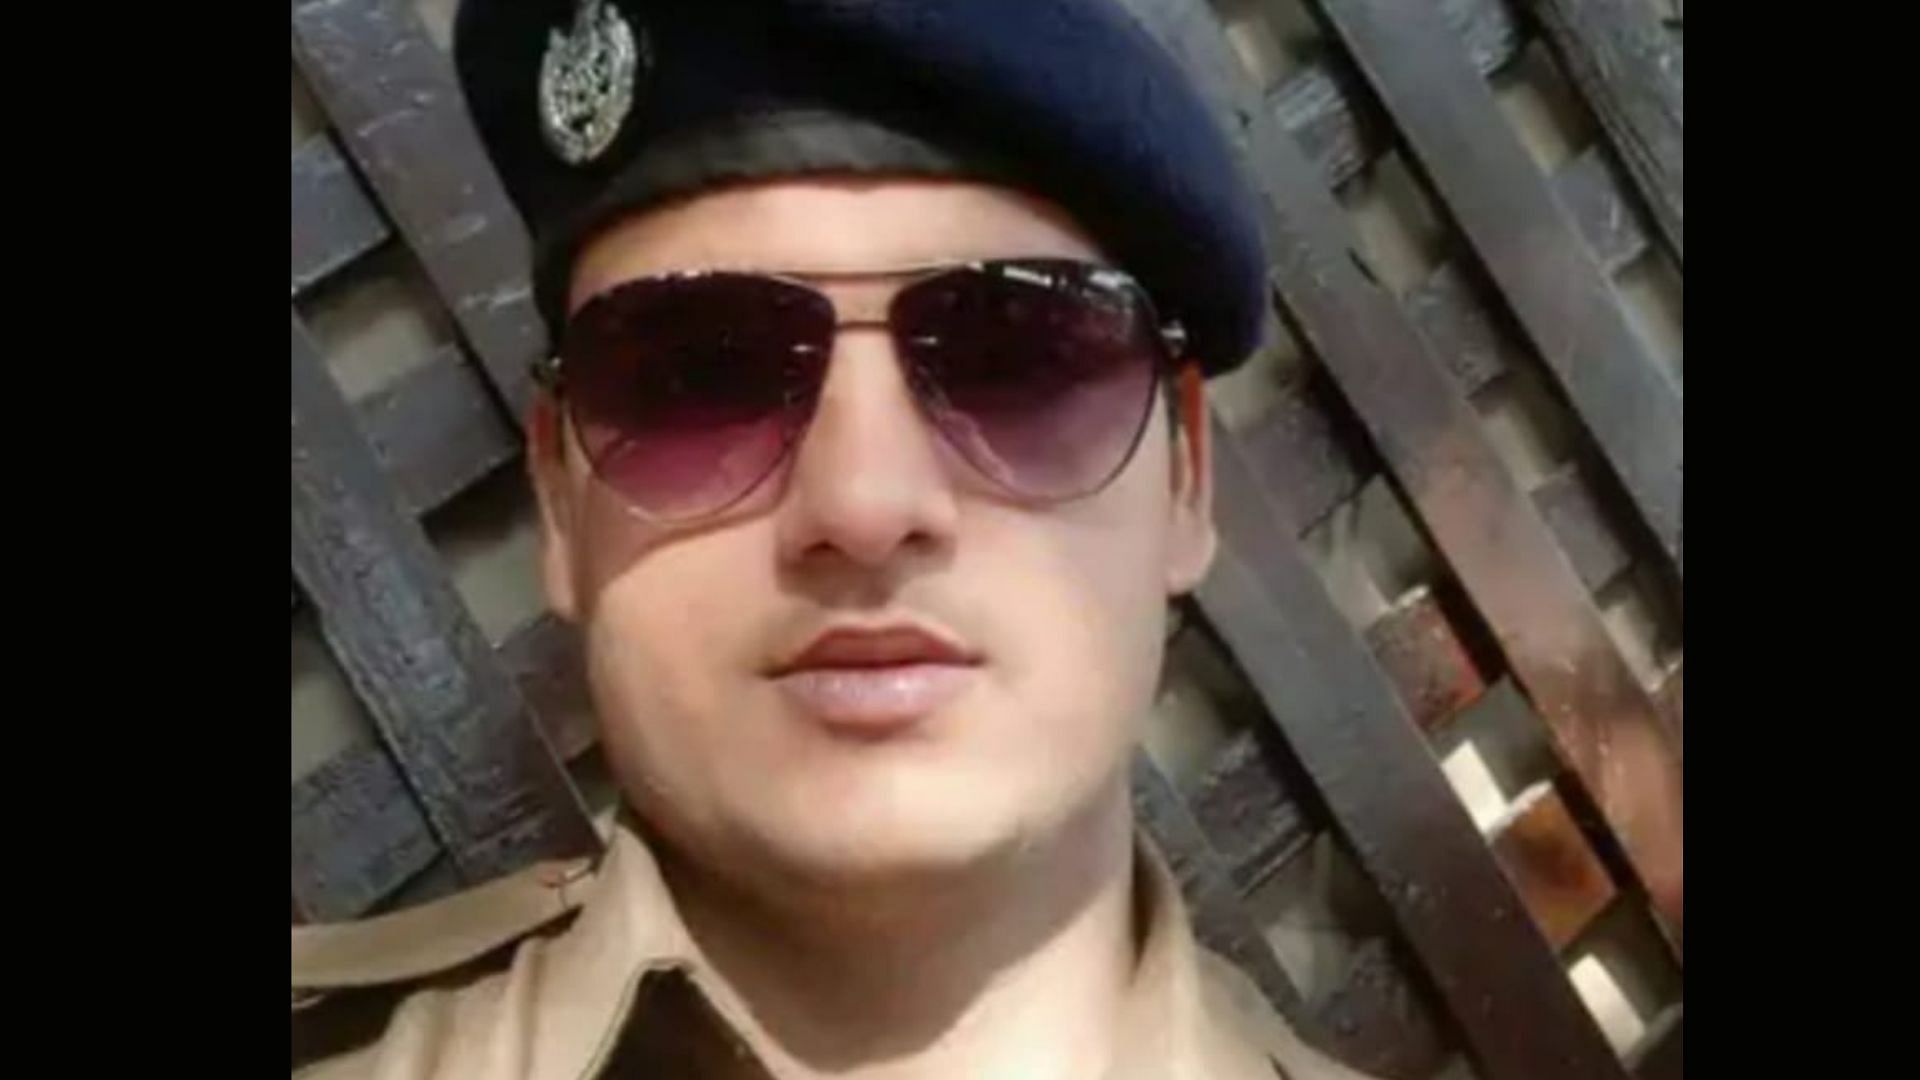 <div class="paragraphs"><p>33-year-old RPF Constable Chetan Singh allegedly fired 12 rounds from his automatic service weapon, killing his colleague ASI Tikaram Meena and three passengers – identified as Abdul Kadir, Mohammed Asghar and Syed Saiffudin – in the Mumbai-bound train early on the morning of 31 July.&nbsp;</p></div>